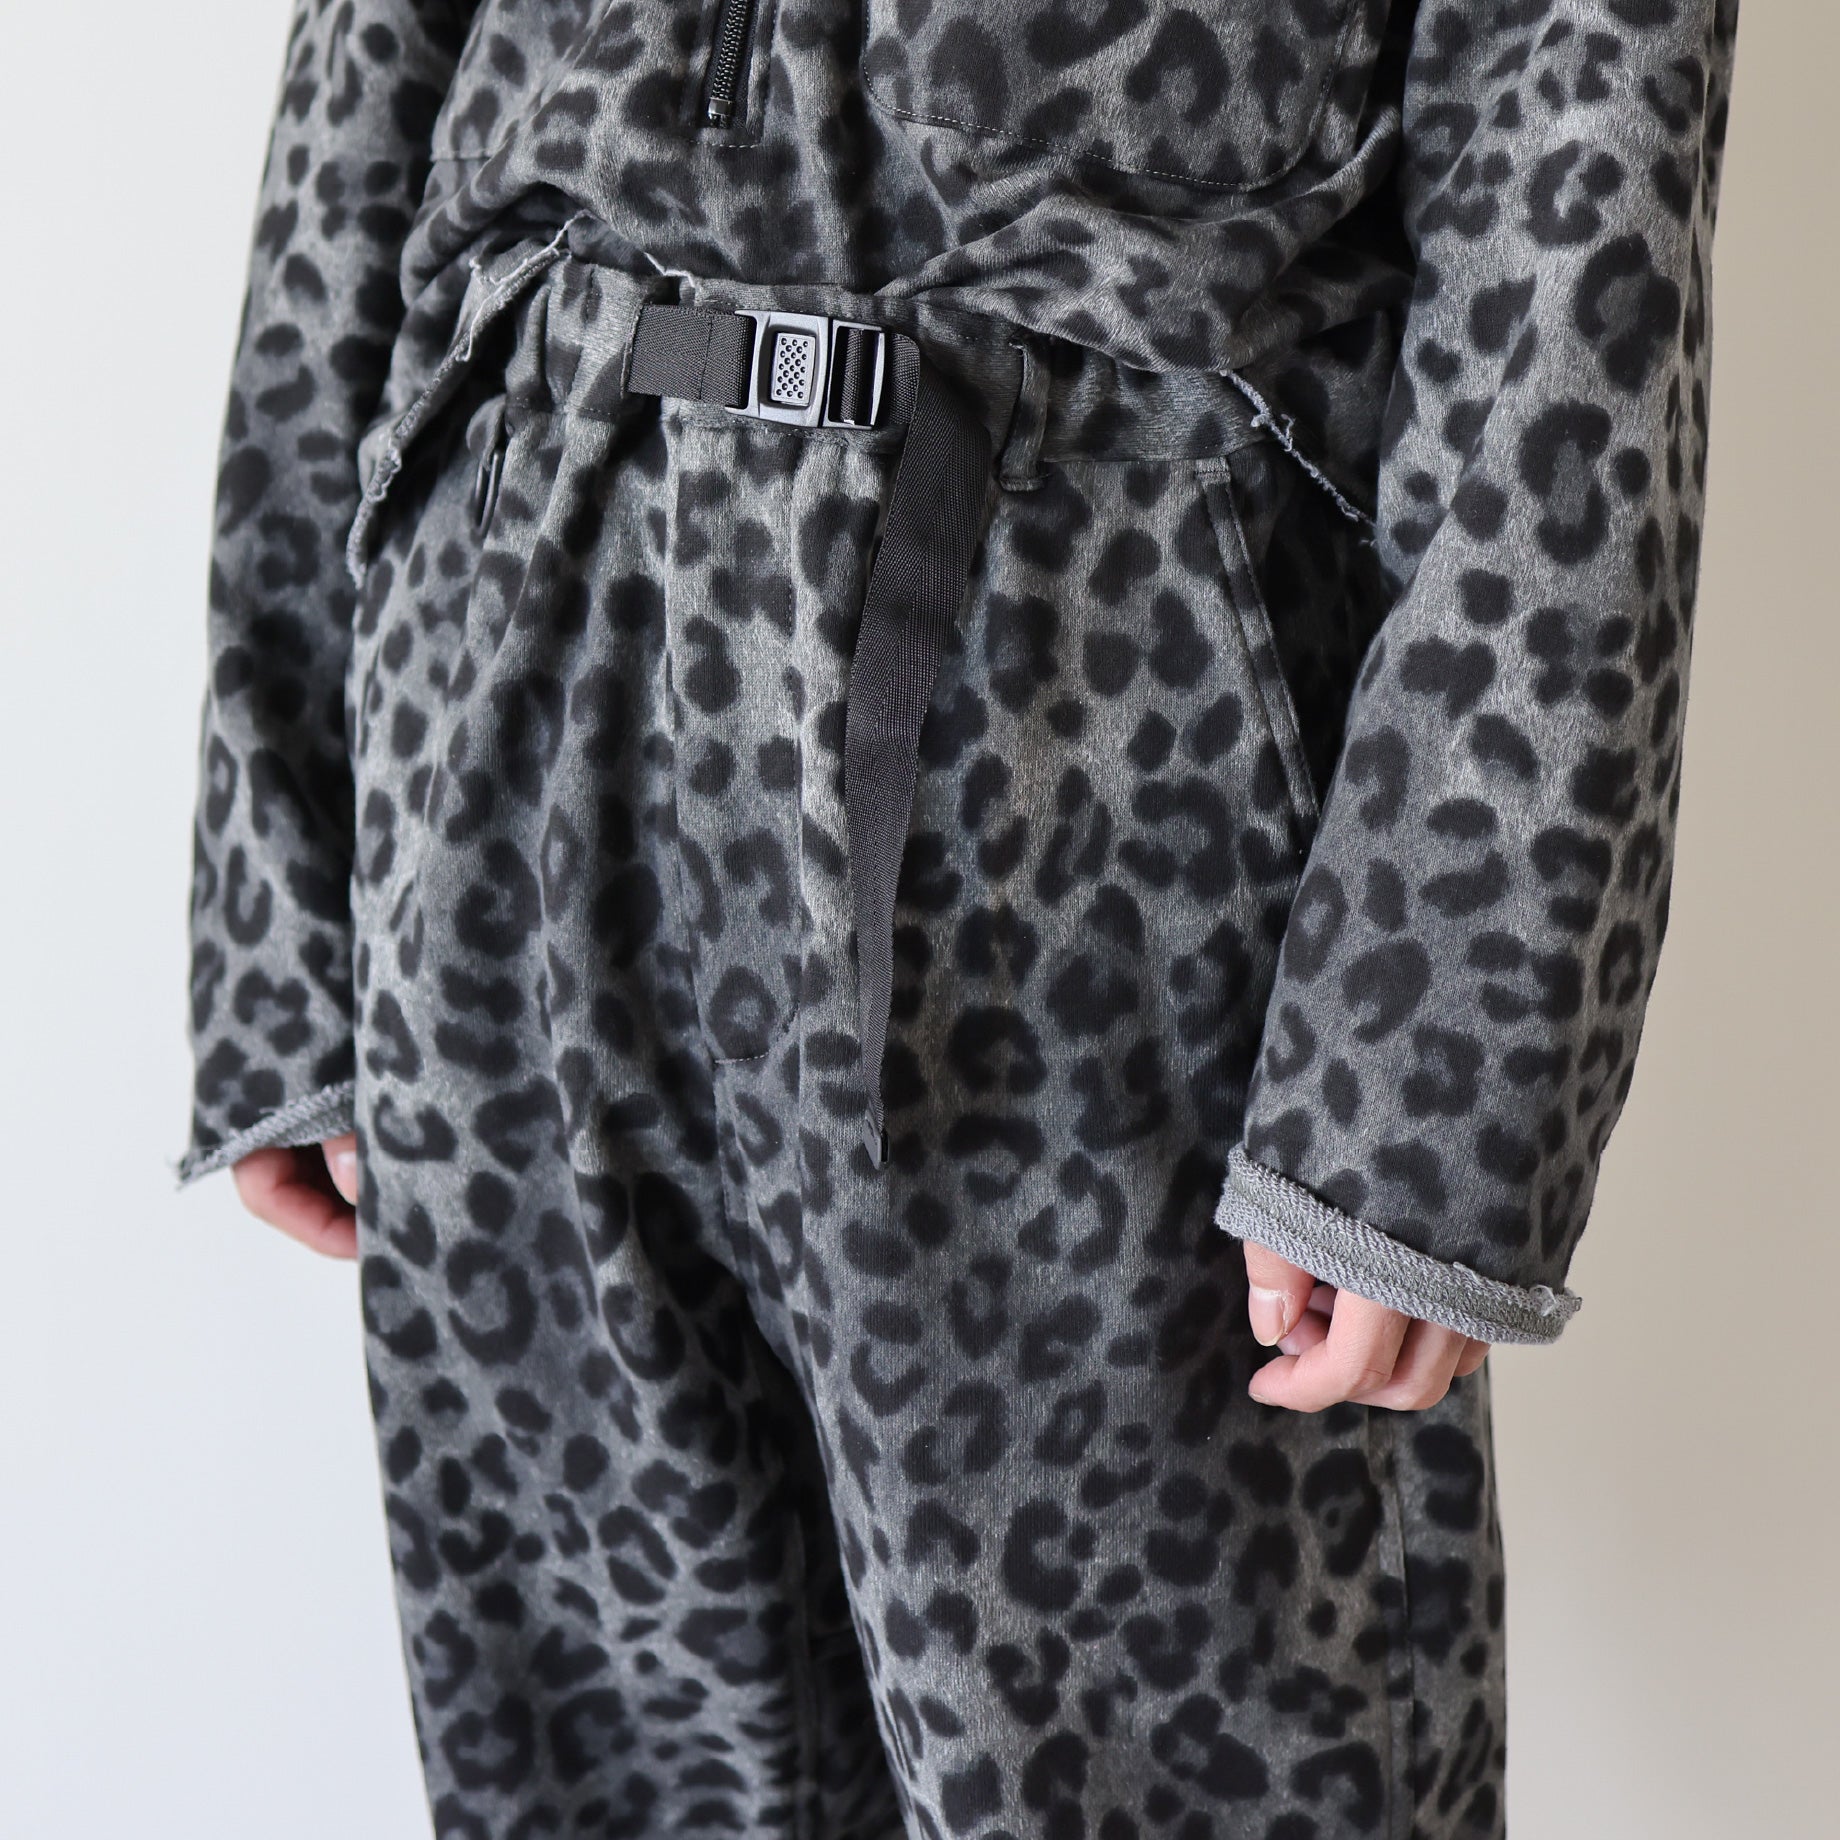 EZ PANT - FRENCH TERRY  / LEOPARD PRINTED（BLACK）